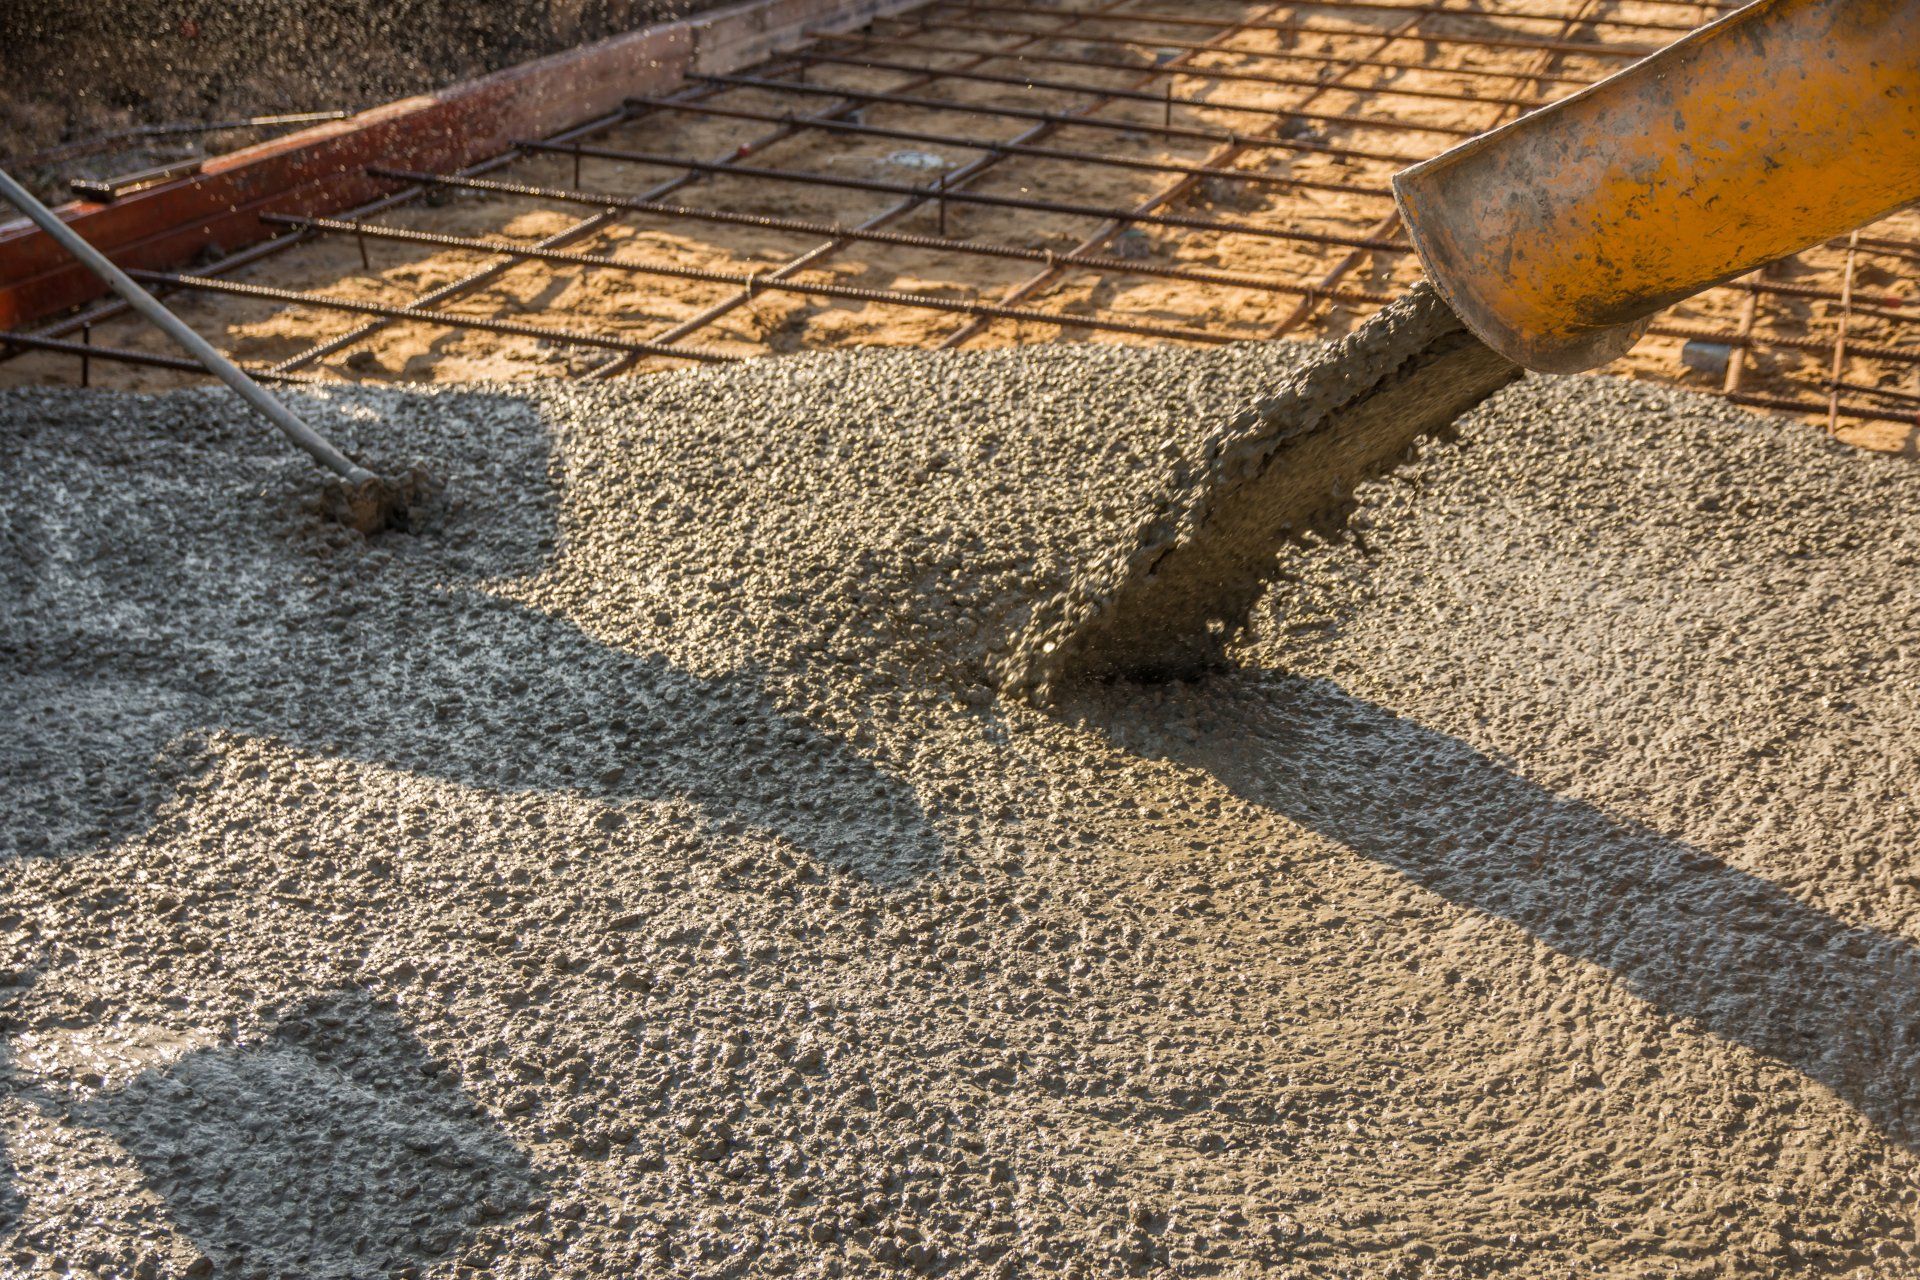 Pouring ready-mixed concrete — Benny’s Concrete Formwork & Reinforcement in Northern Rivers, NSW